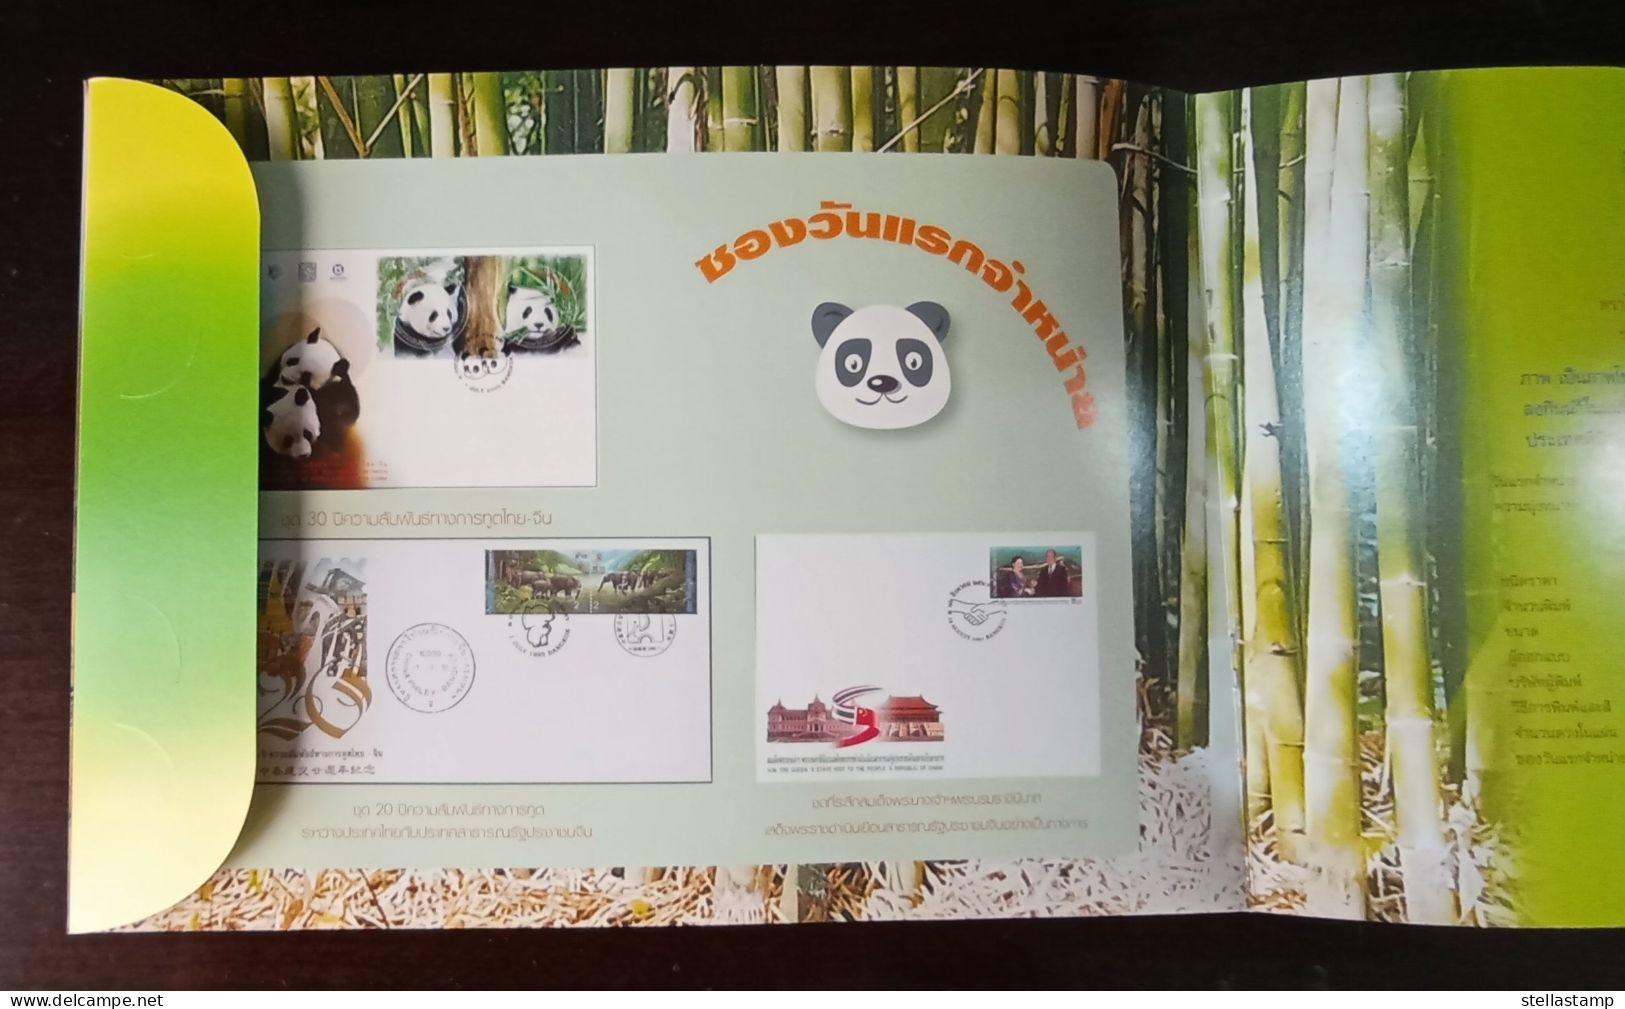 Thailand Stamp 2005 30th Ann of the Diplomatic Relation Thai - China (Panda) Pack